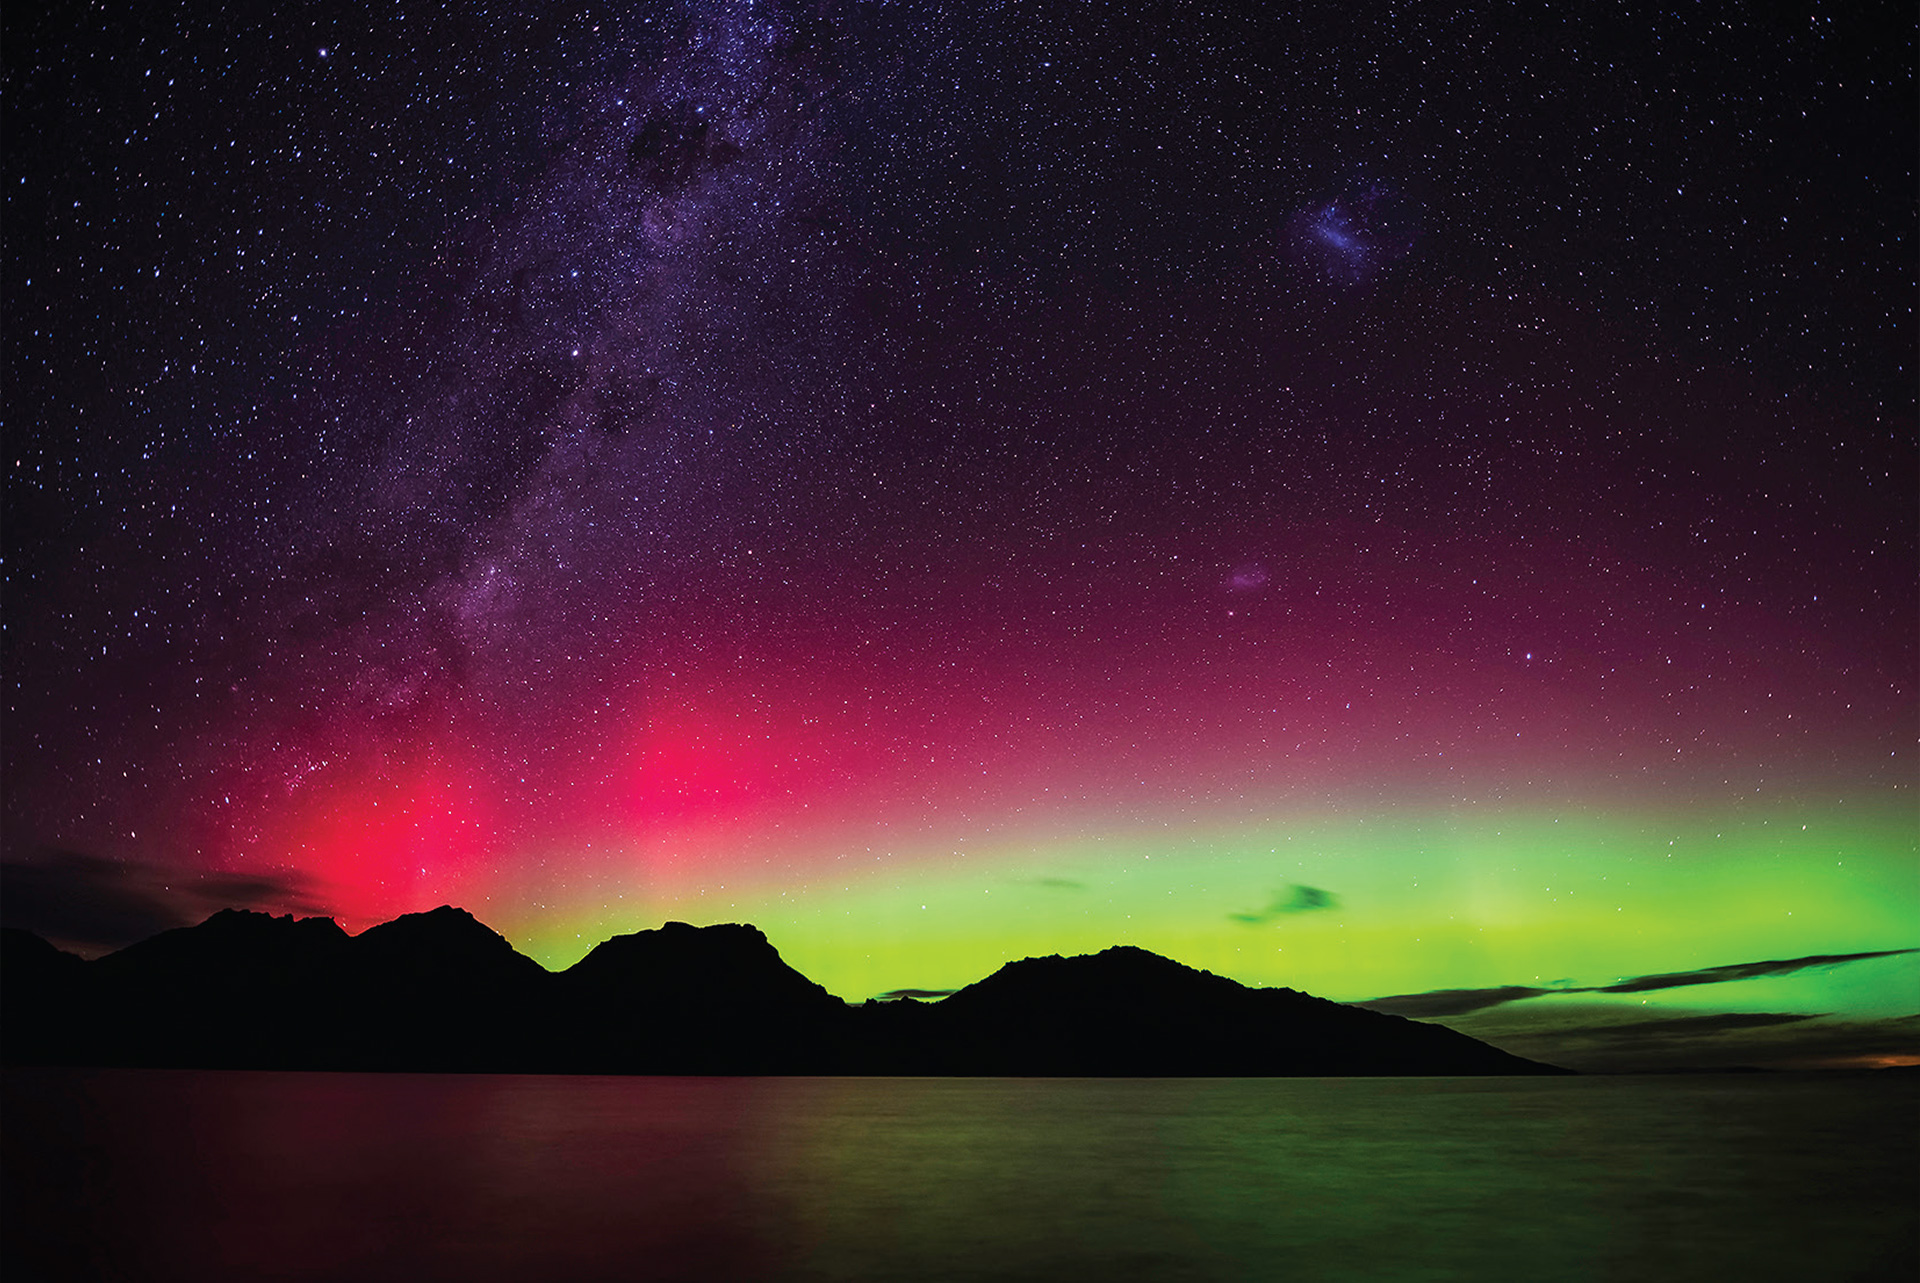 Purple, pink and green layers of light in the night sky, over silhouetted hills and sea, which reflects the colours